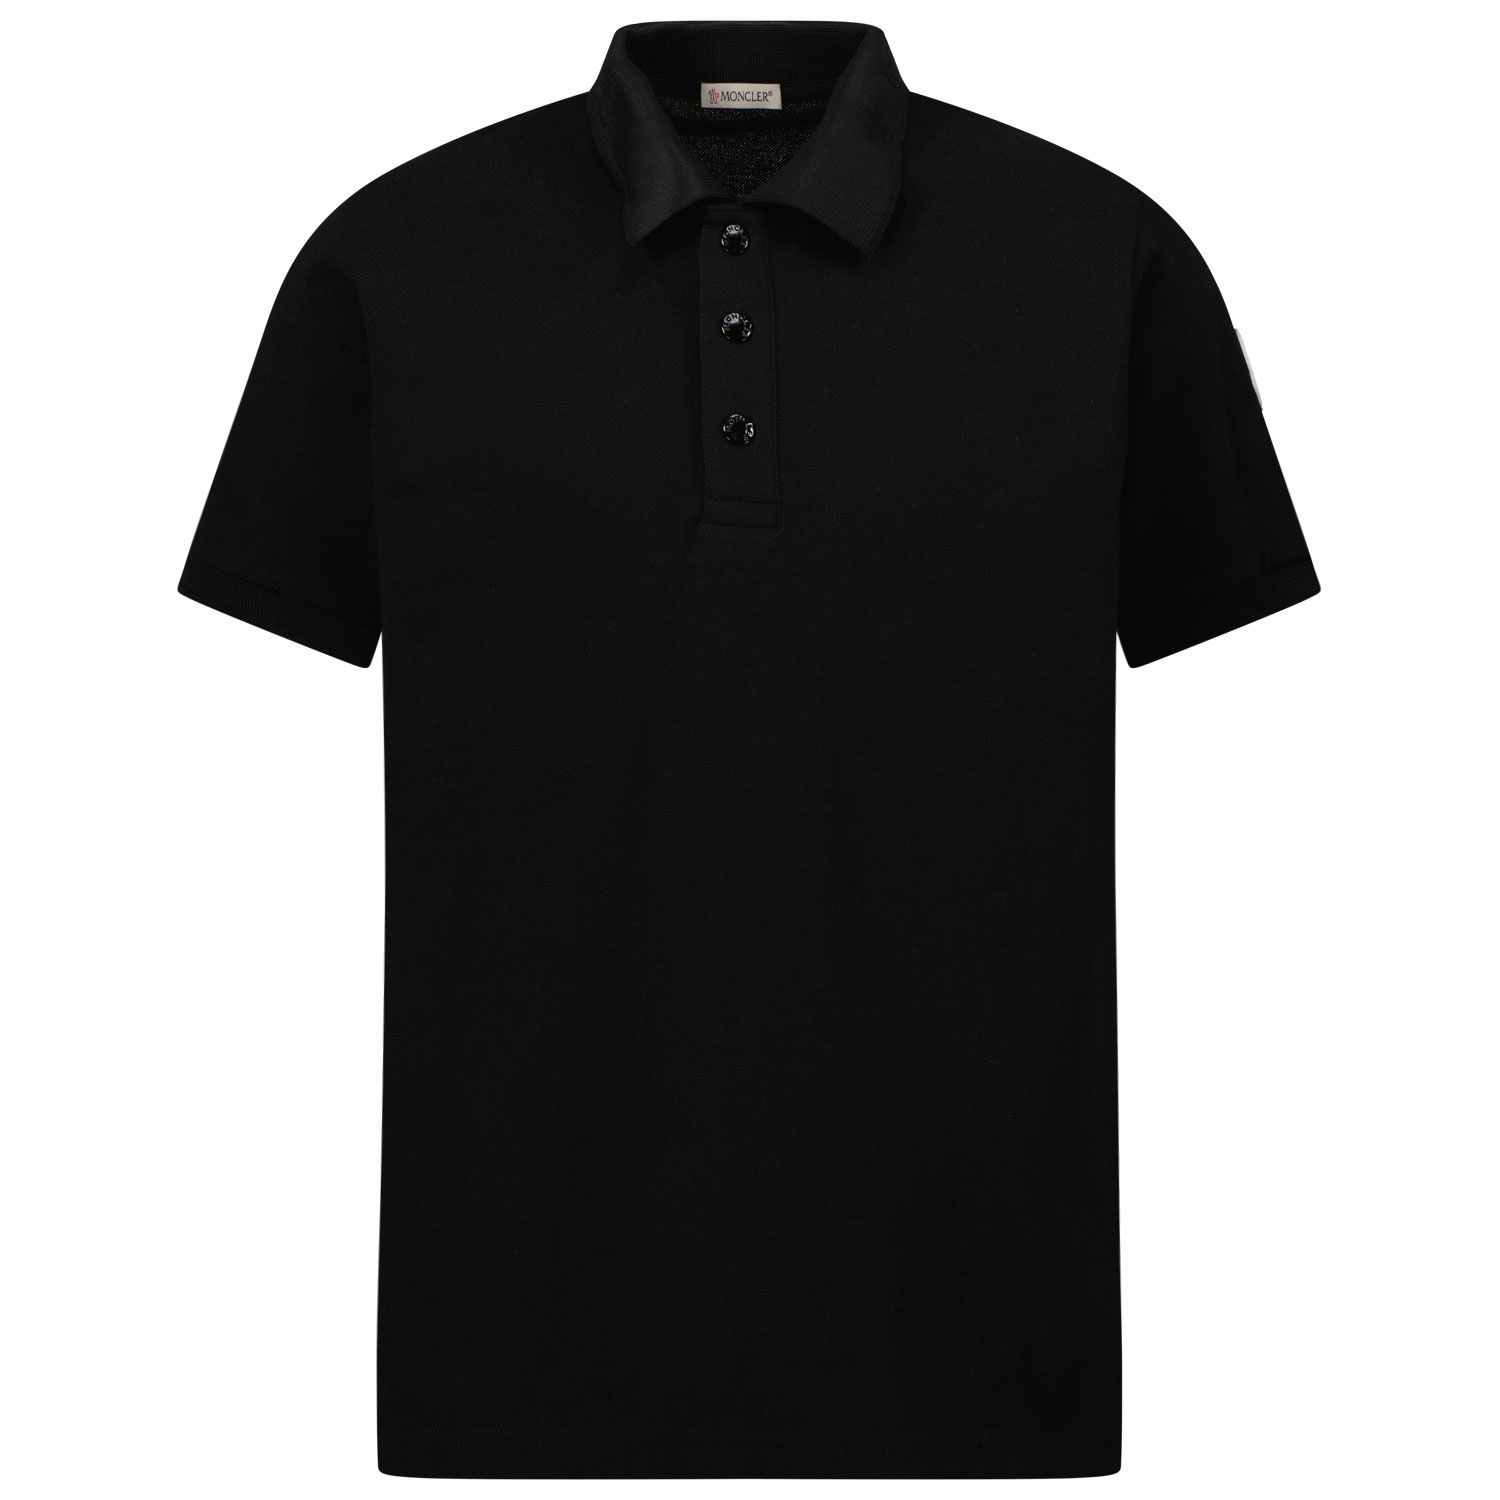 Picture of Moncler 8A00004 kids polo shirt black